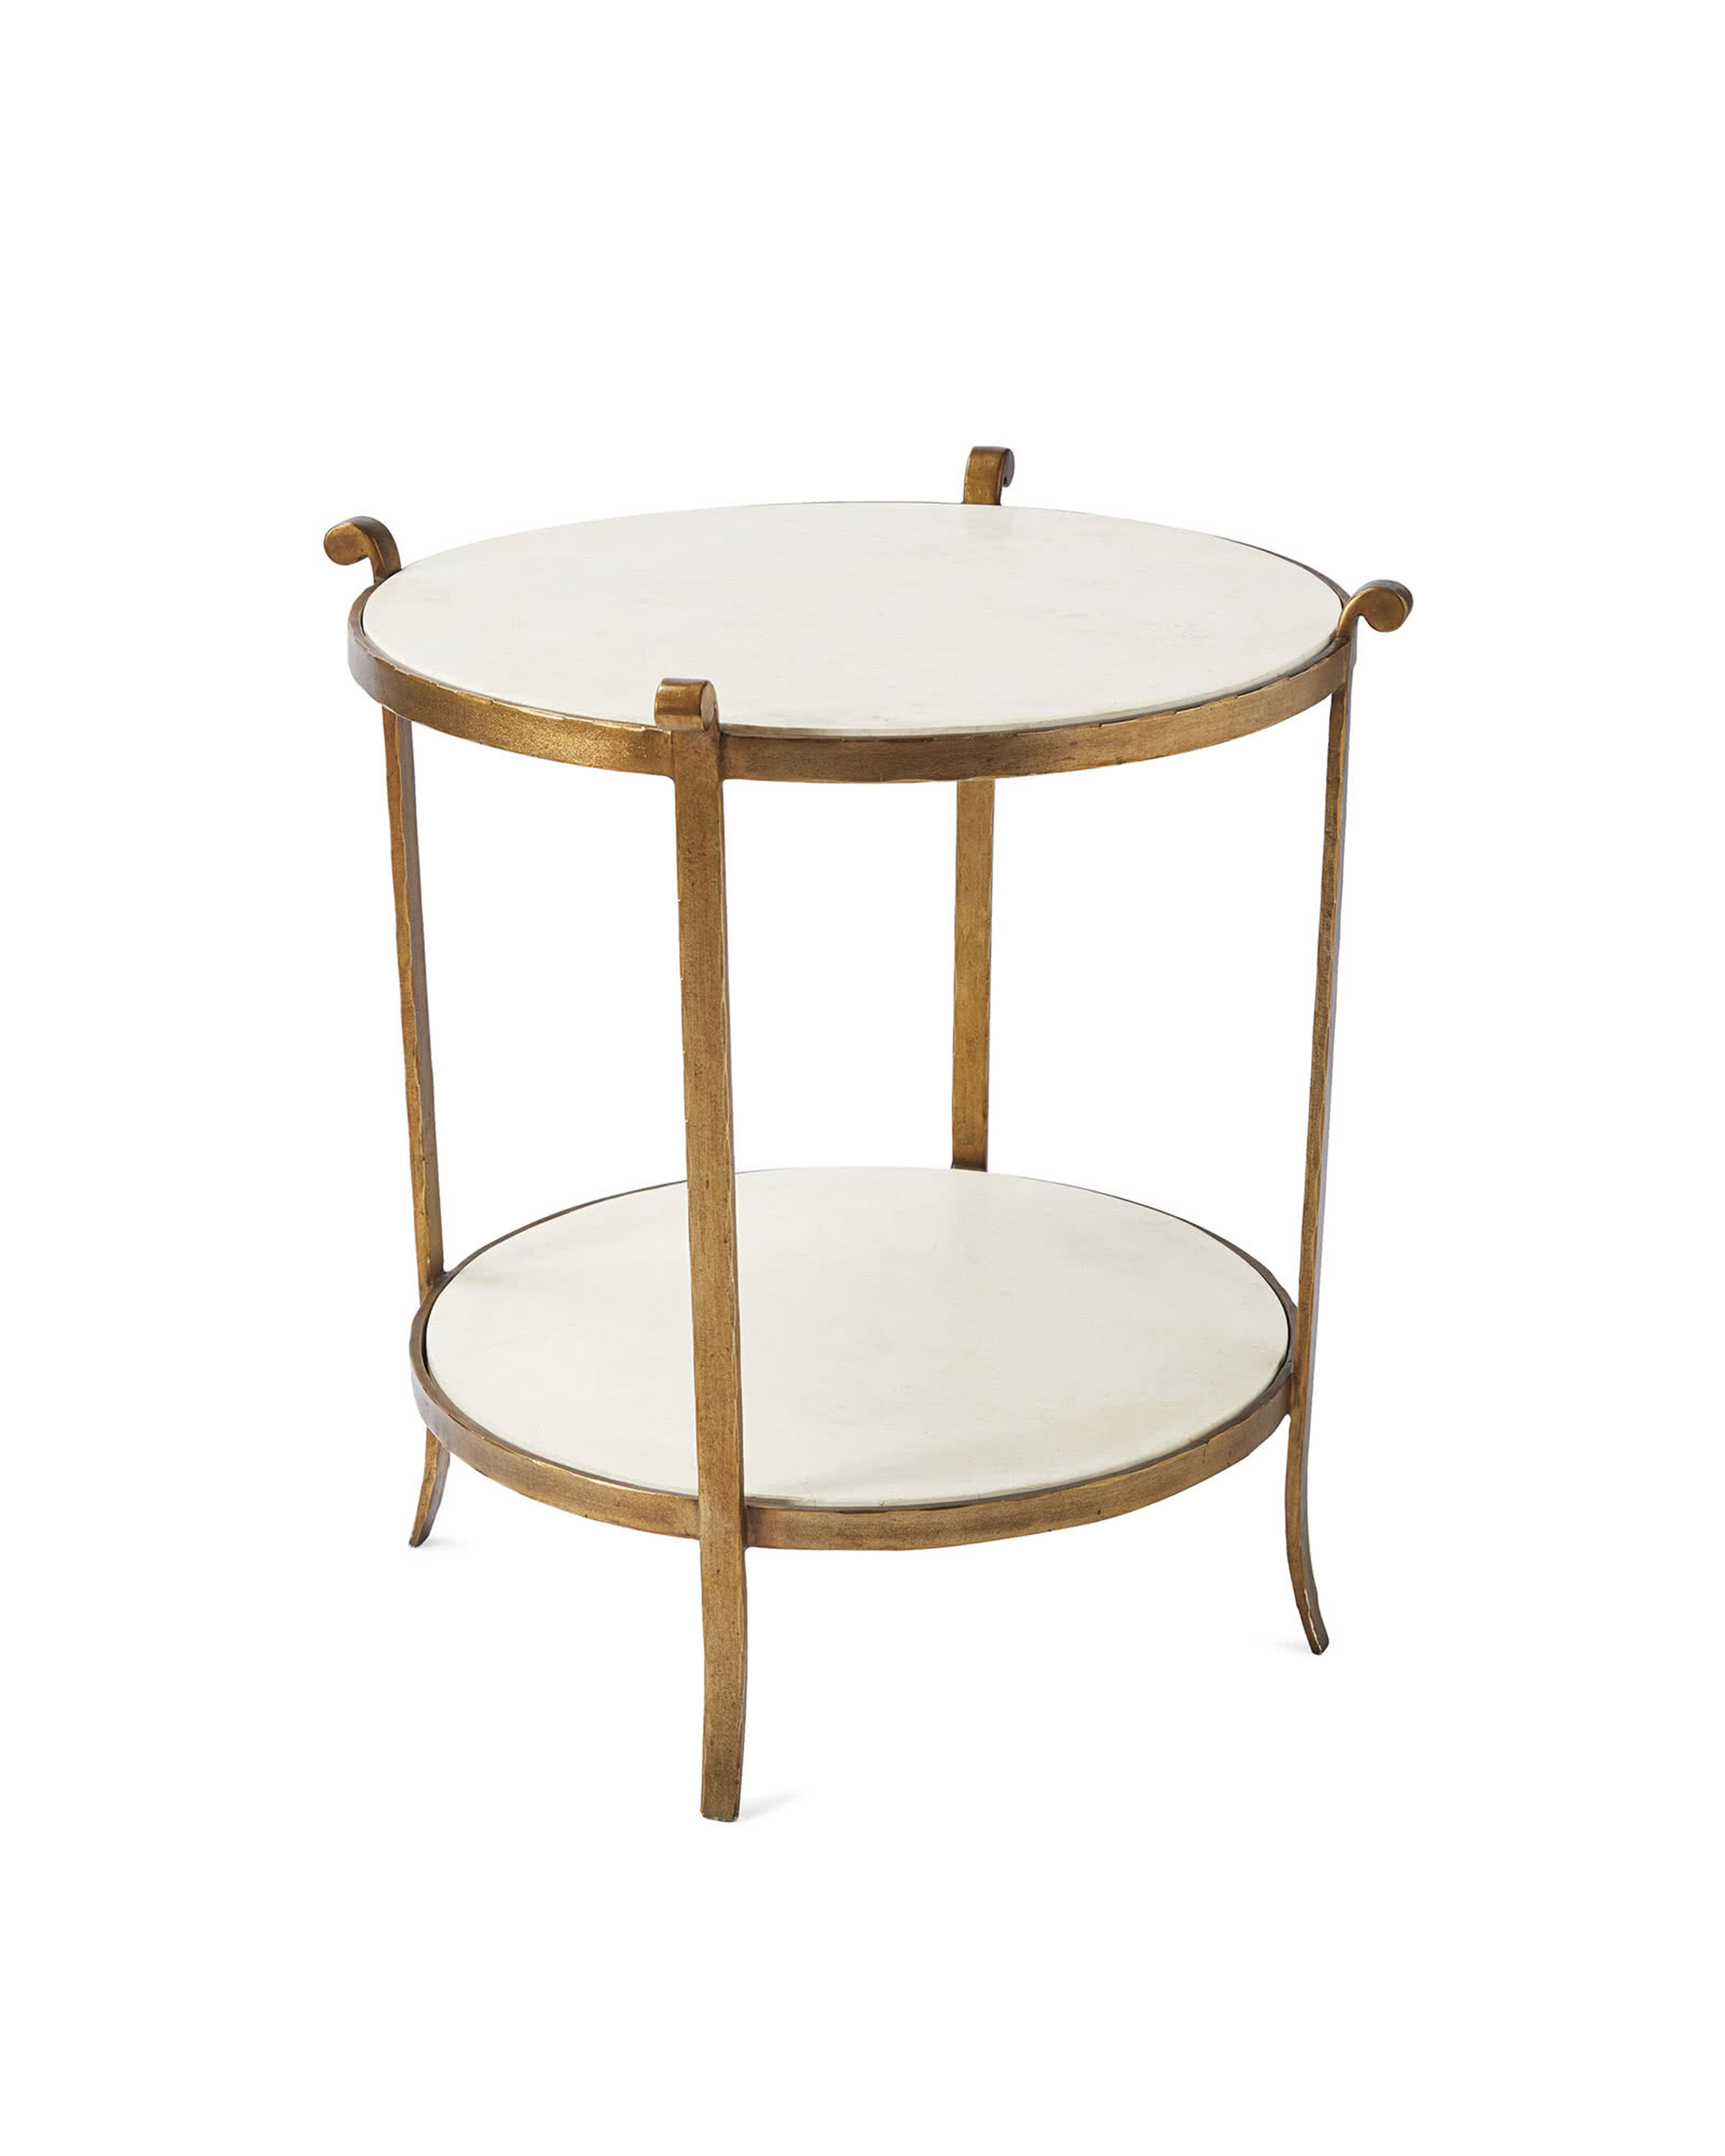 St. Germain Stone Side Table - Serena and Lily